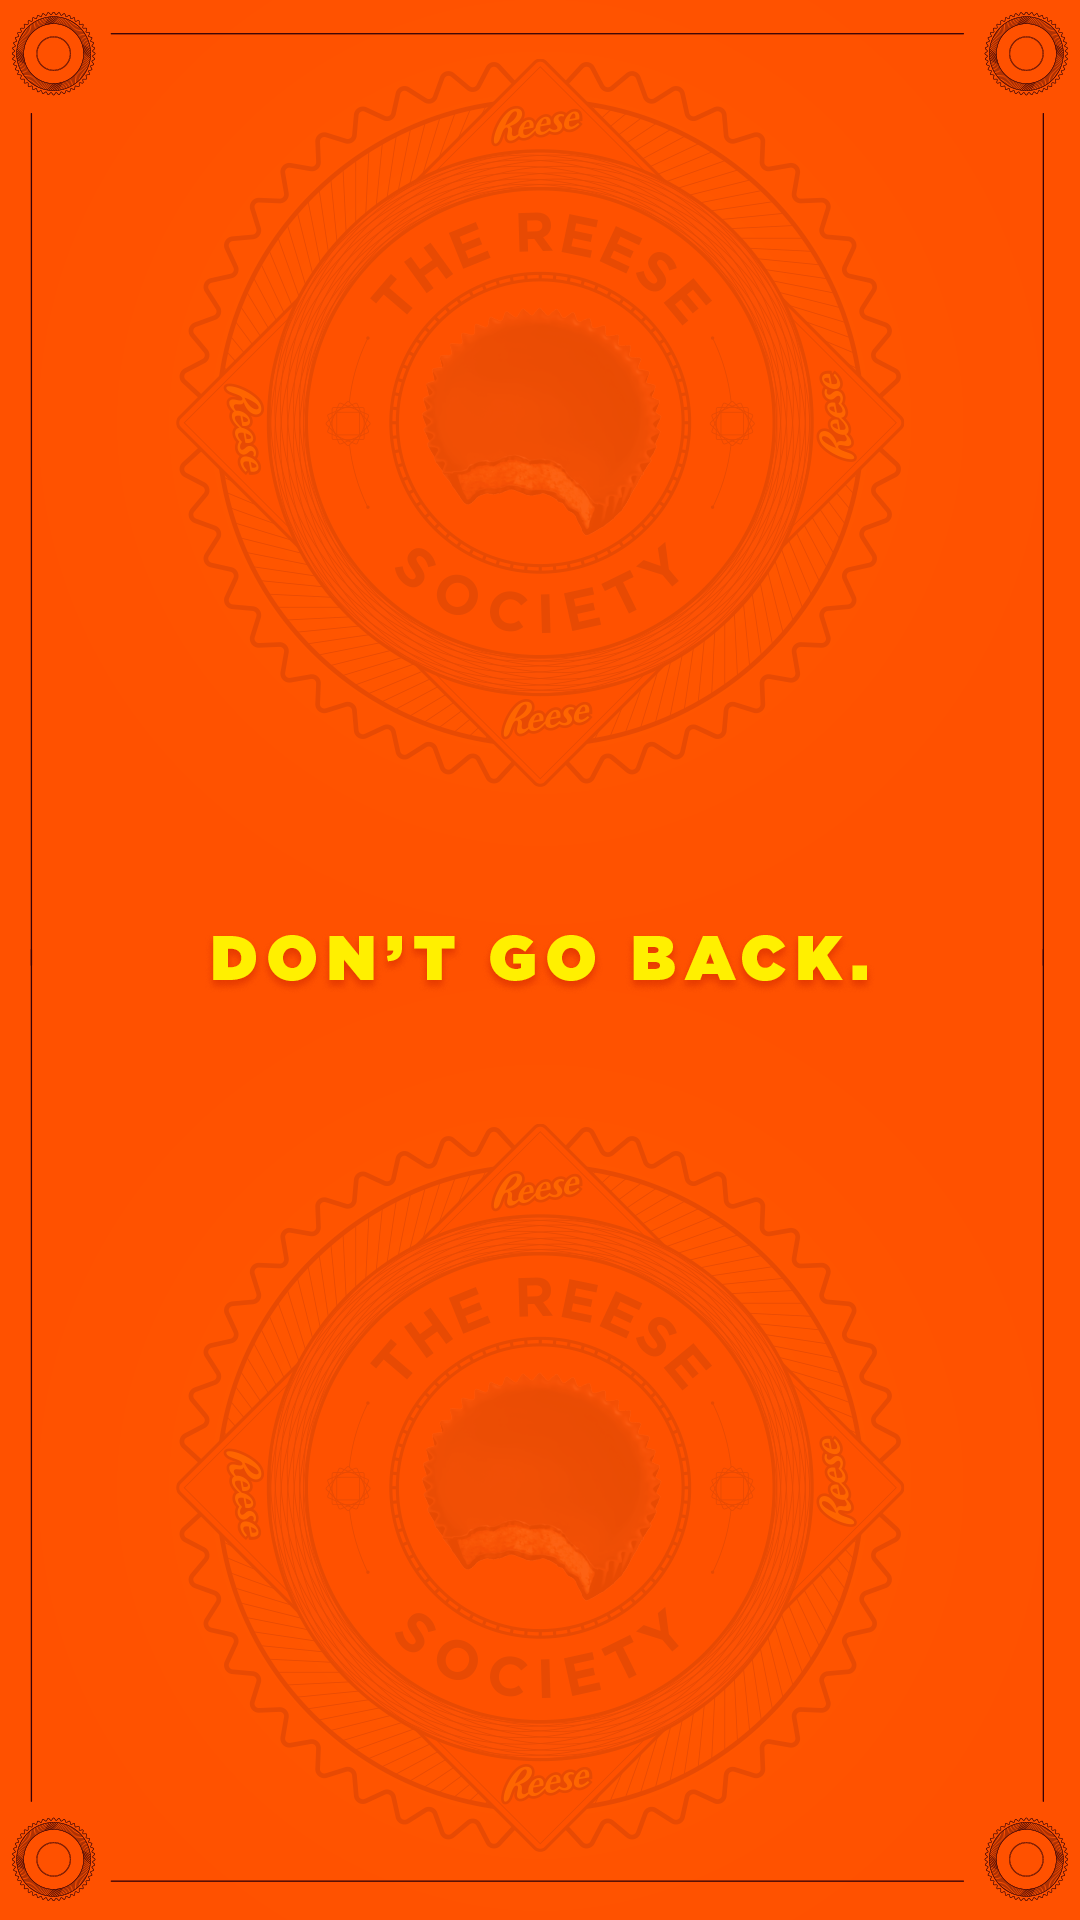 Reese-Society-IG_0084_Don_t-go-back.png